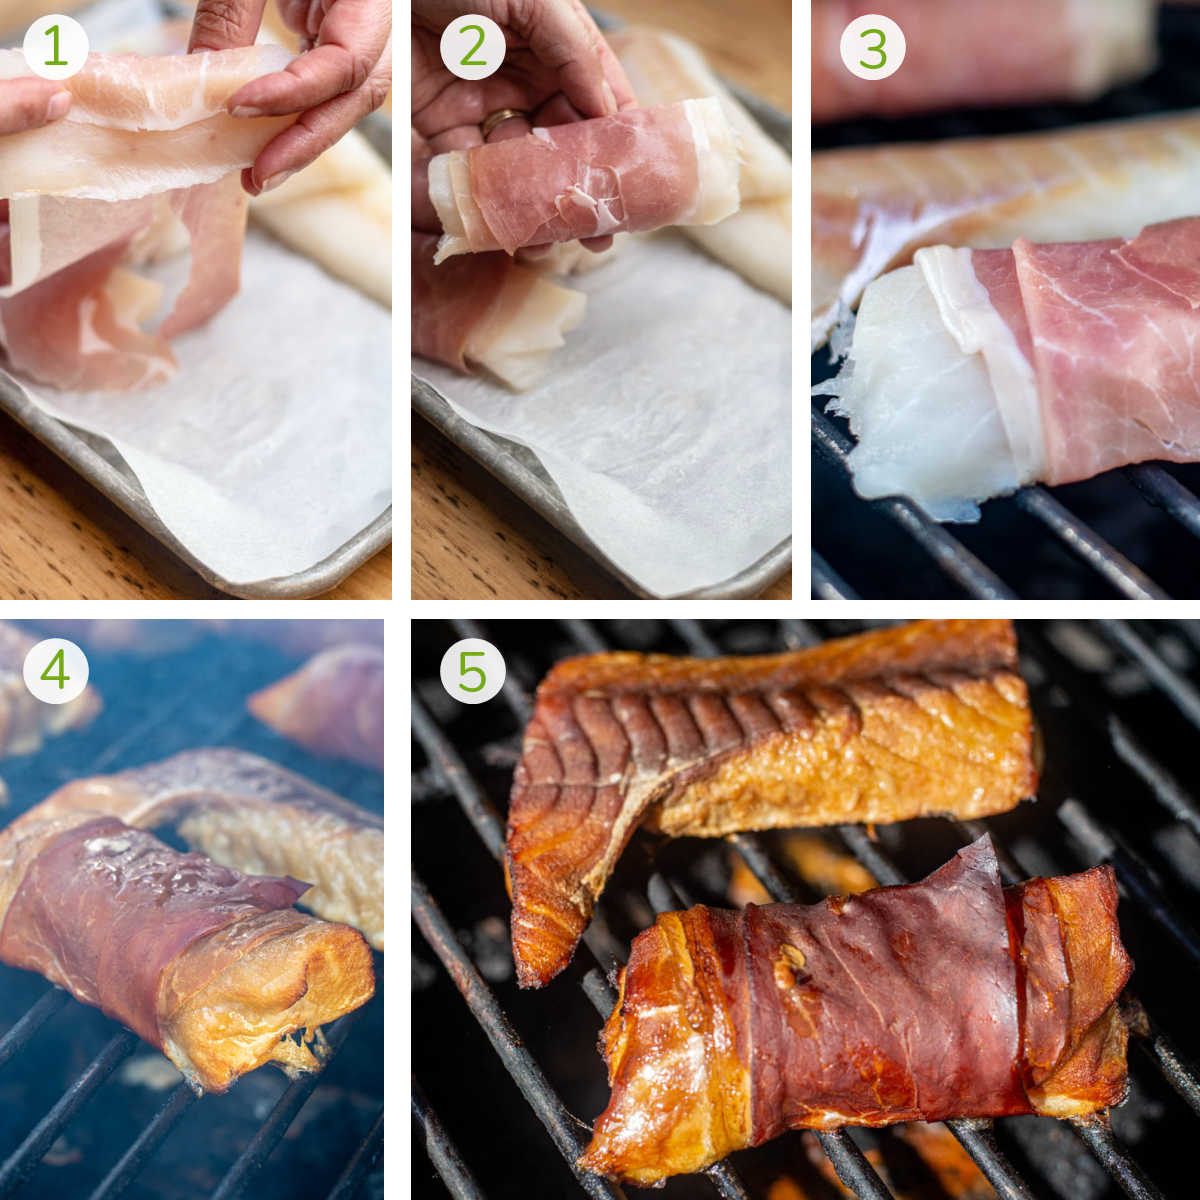 process photos showing how to slice and wrap a piece of cod, place it on the grill and smoke it.